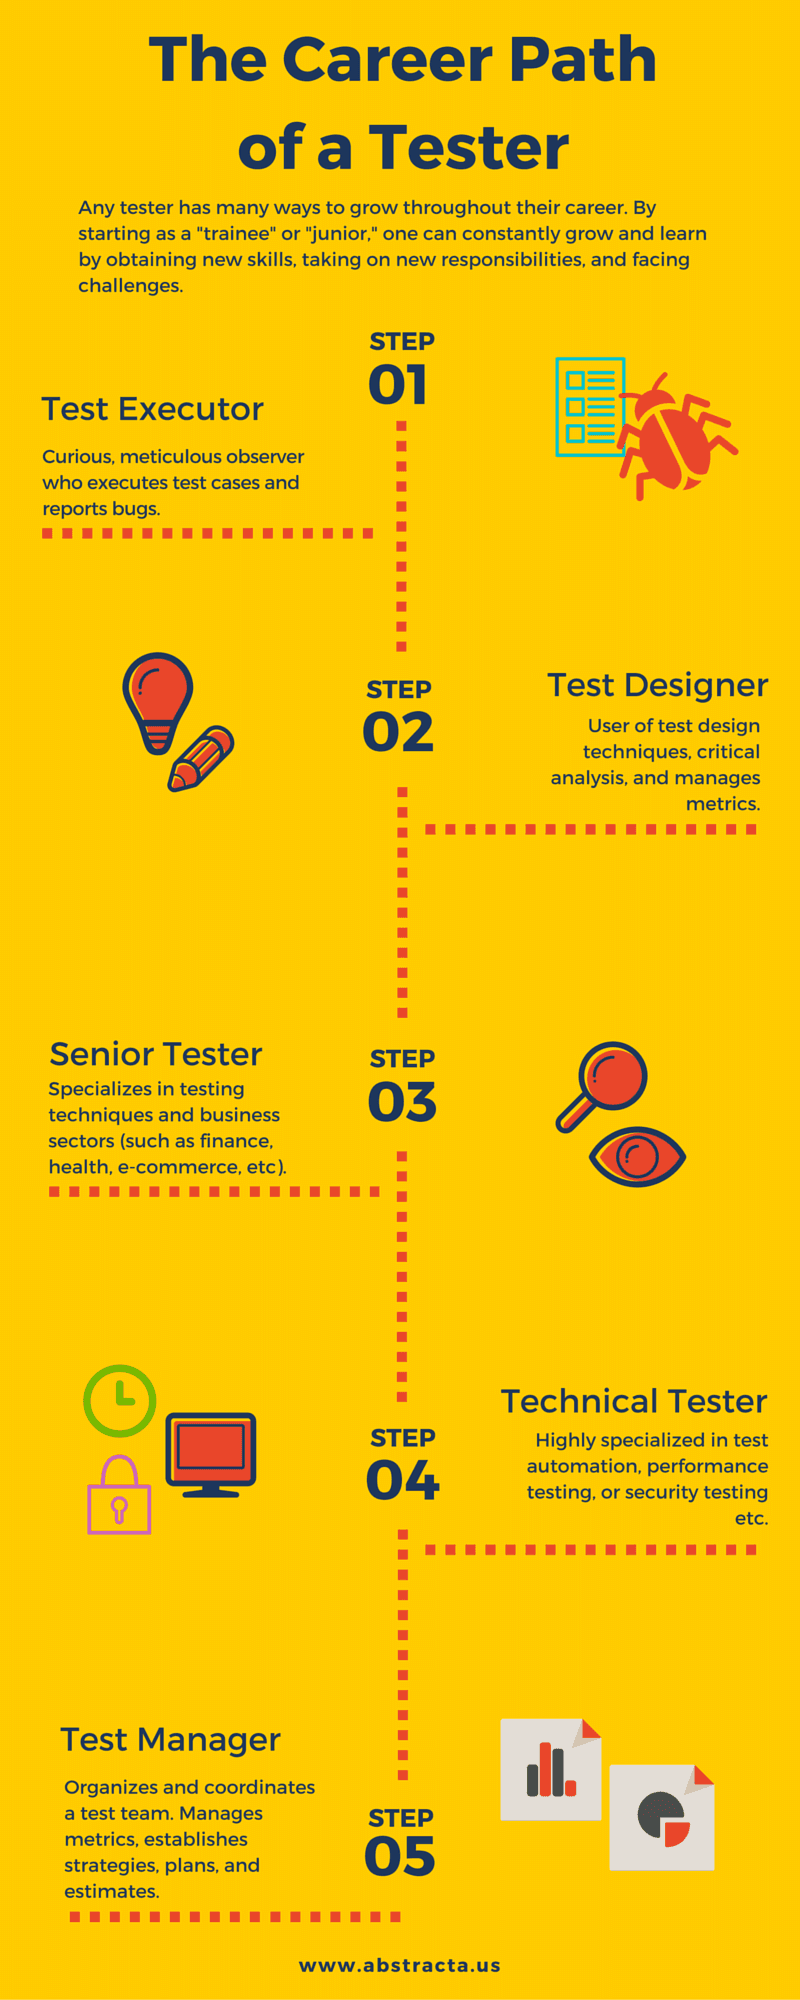 The Career Path of a Tester